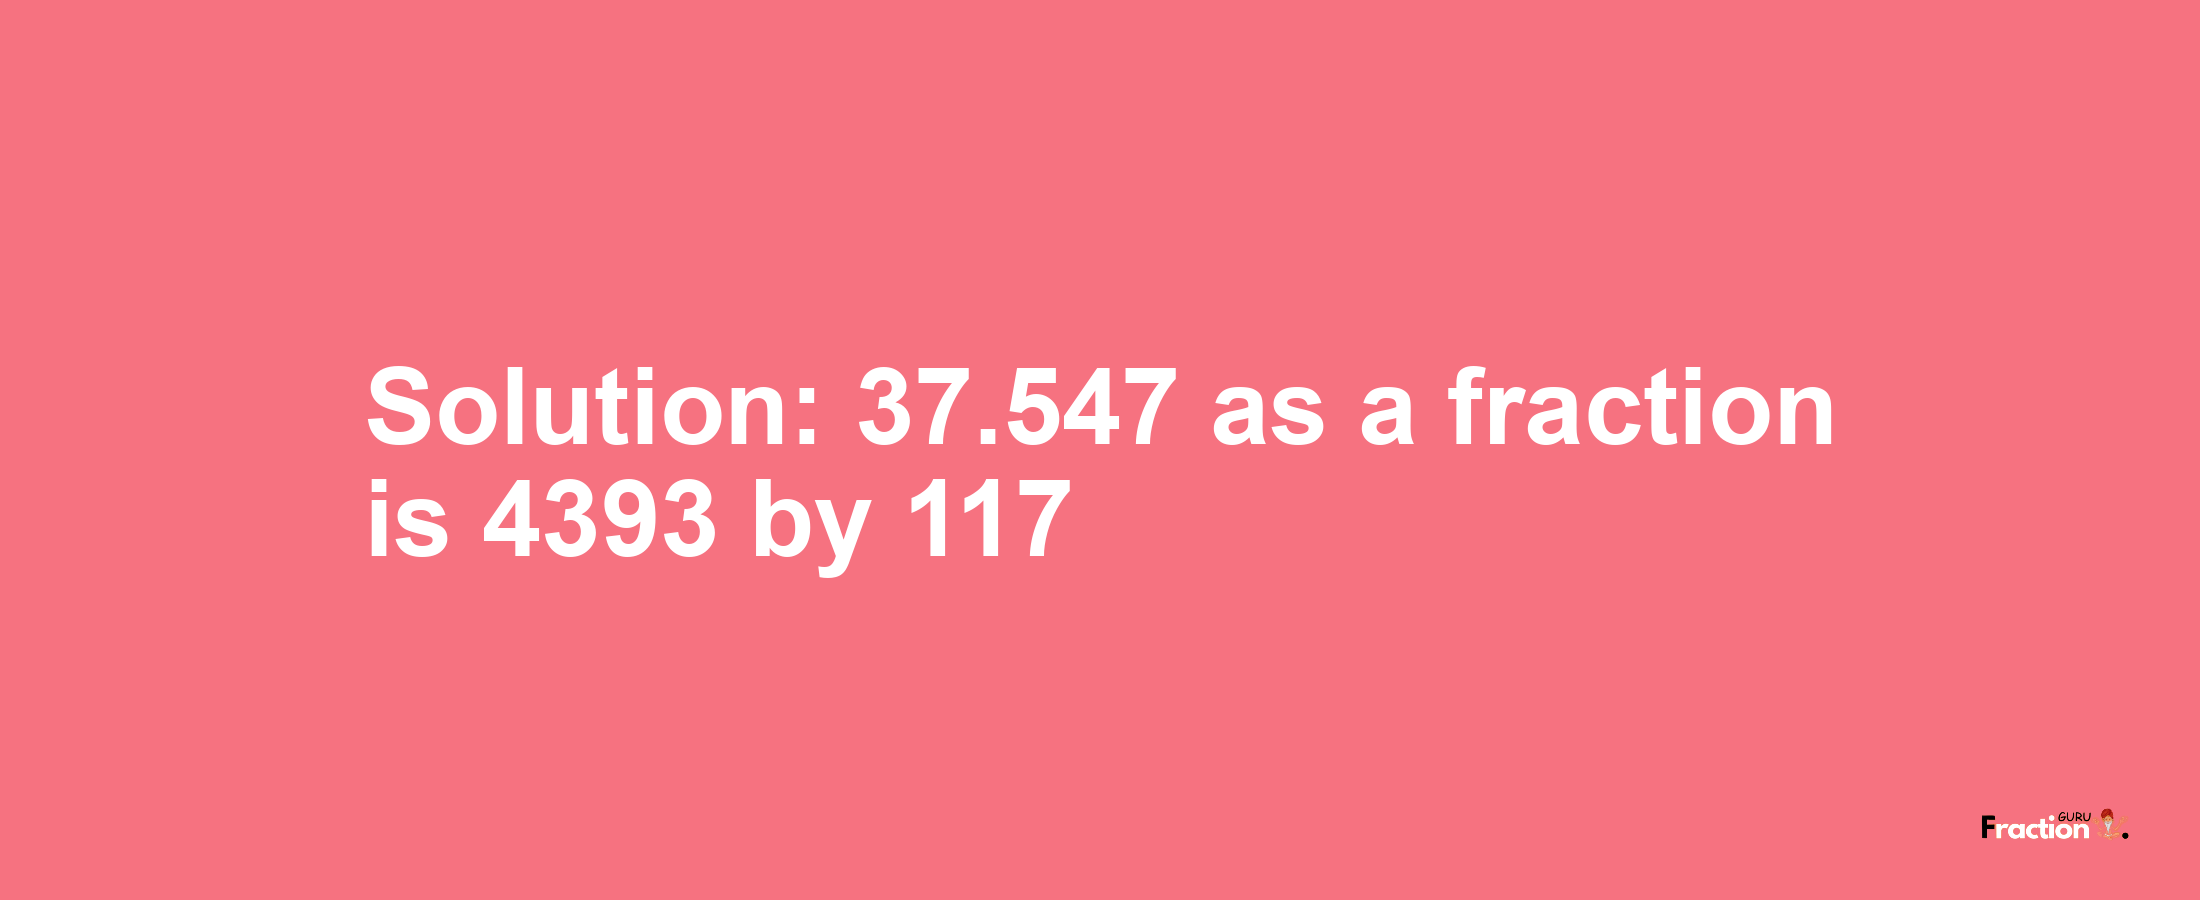 Solution:37.547 as a fraction is 4393/117